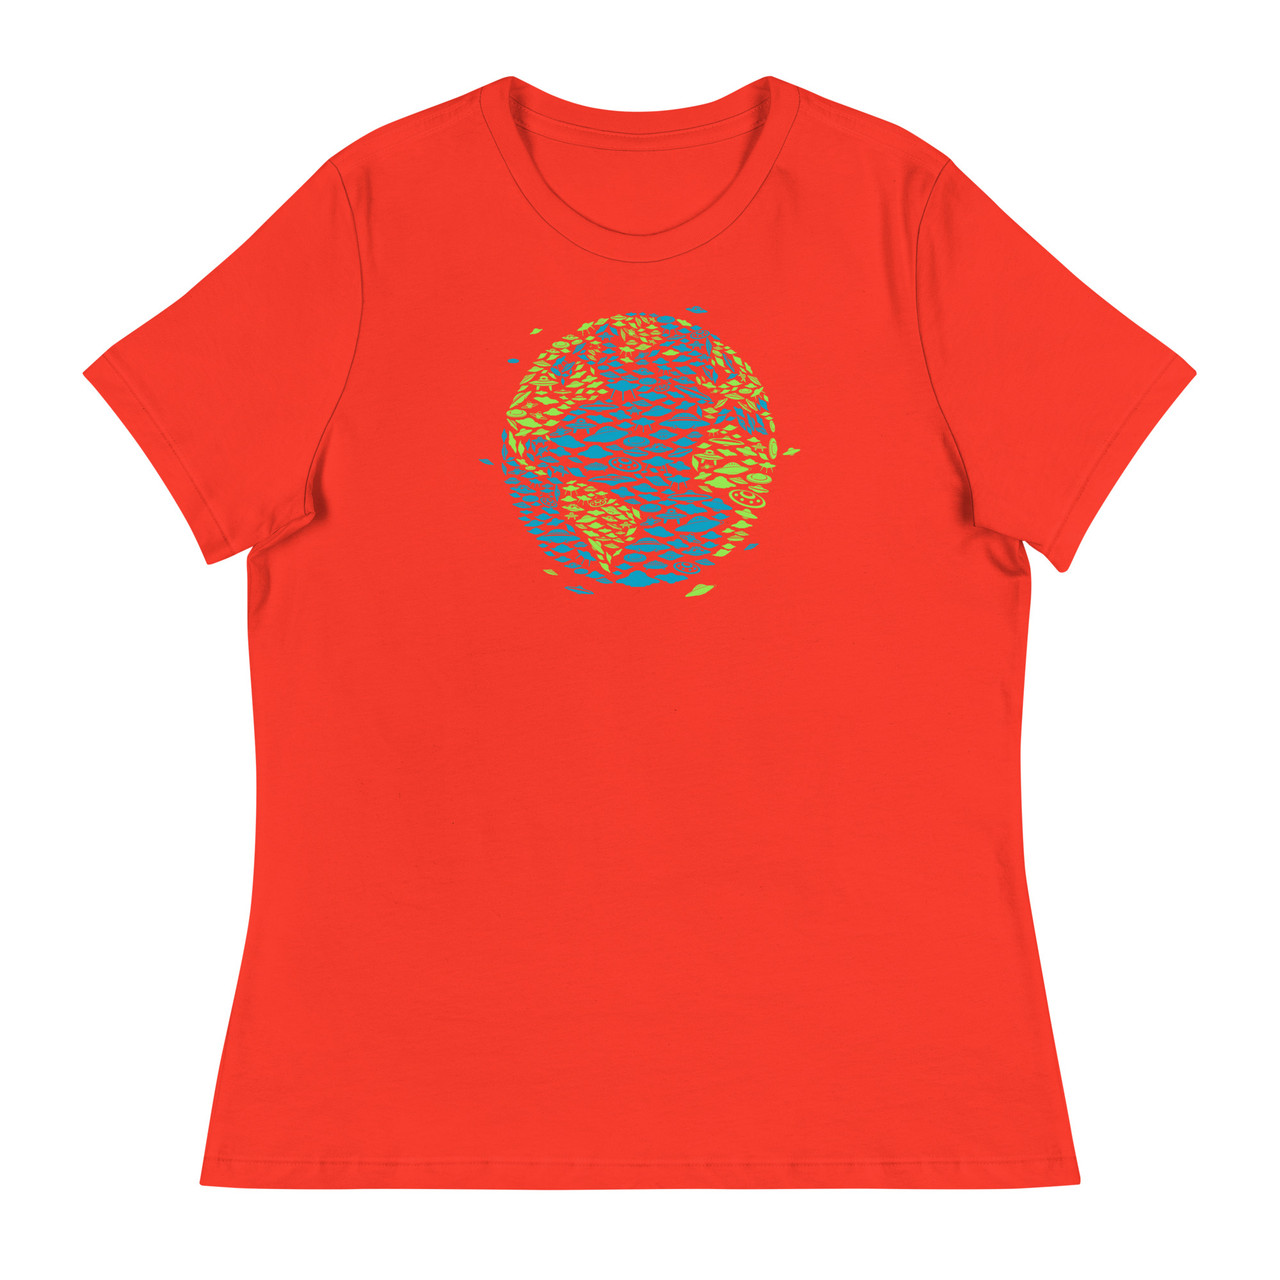 Planet Invasion Women's Relaxed T-Shirt - Bella + Canvas 6400 